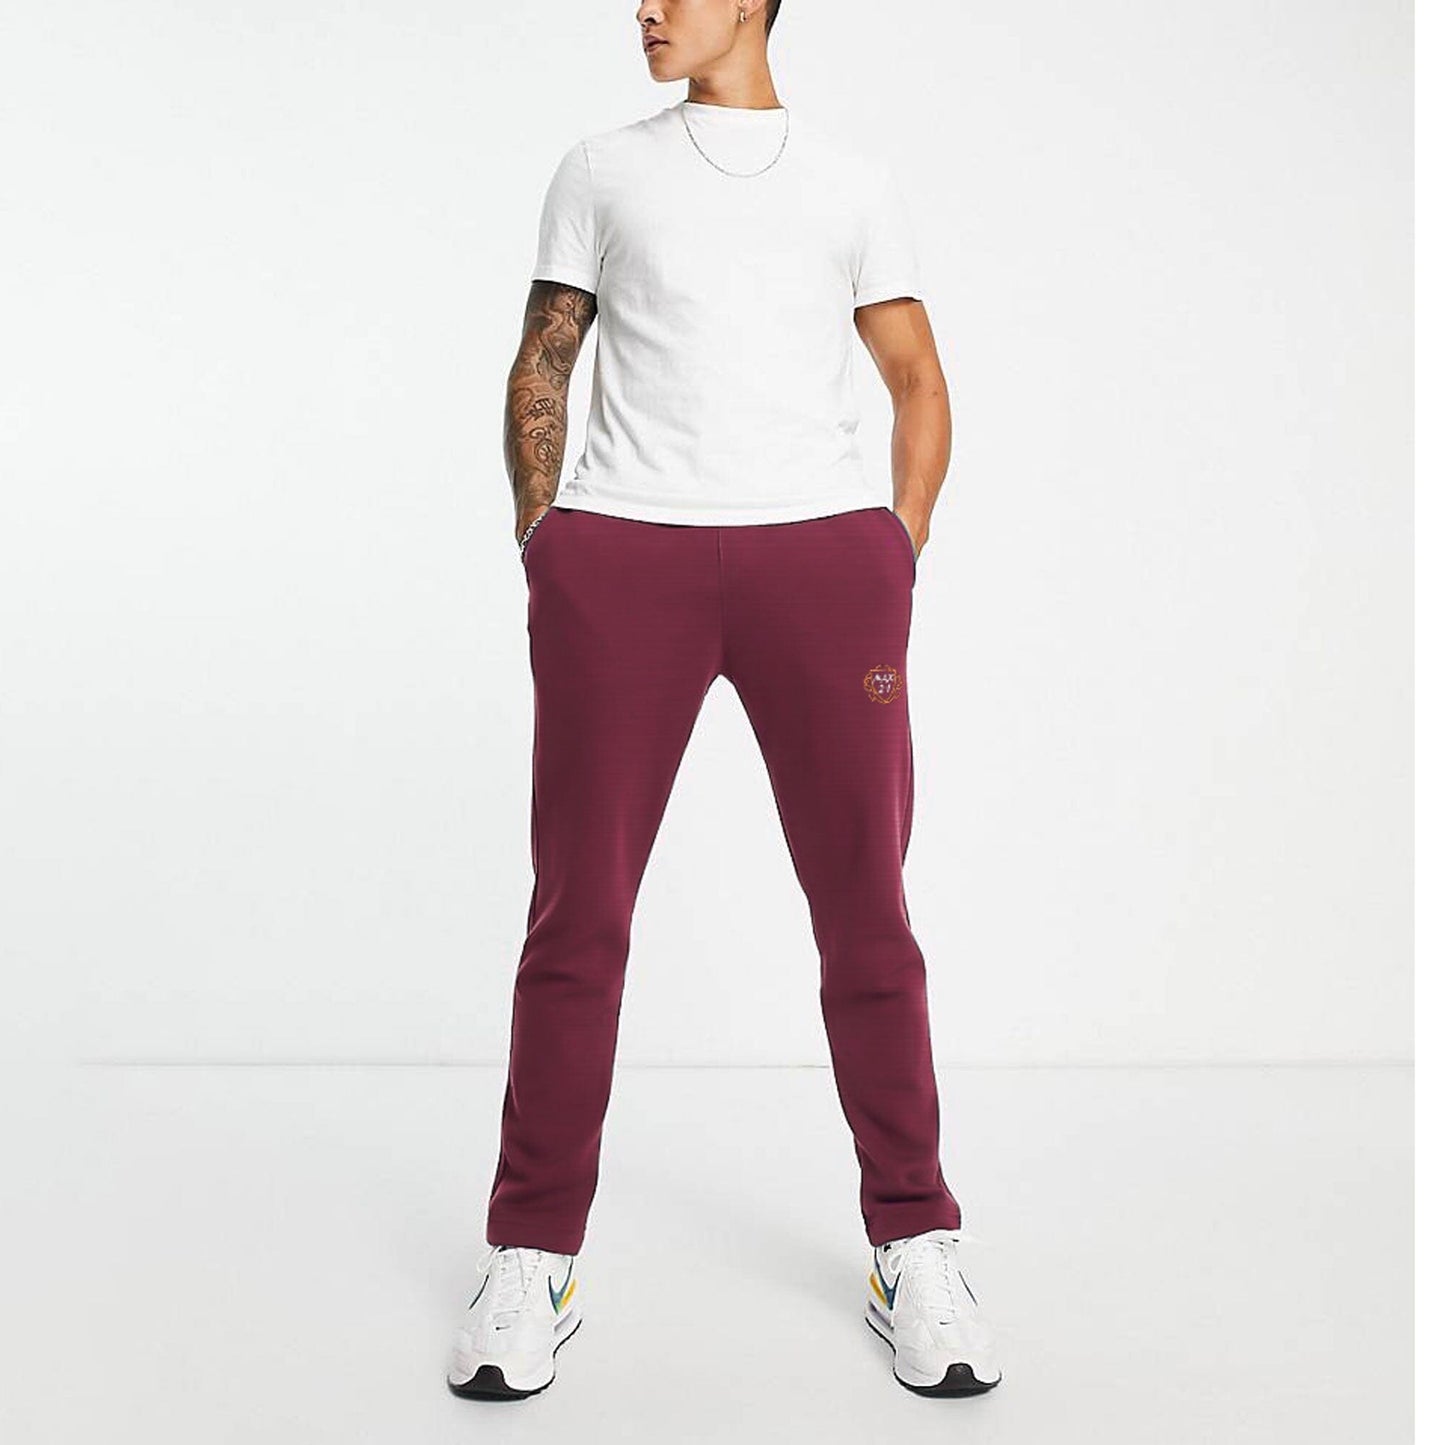 MAX 21 Men's Logo Embroidered Loungewear Trousers Men's Trousers SZK Maroon M 